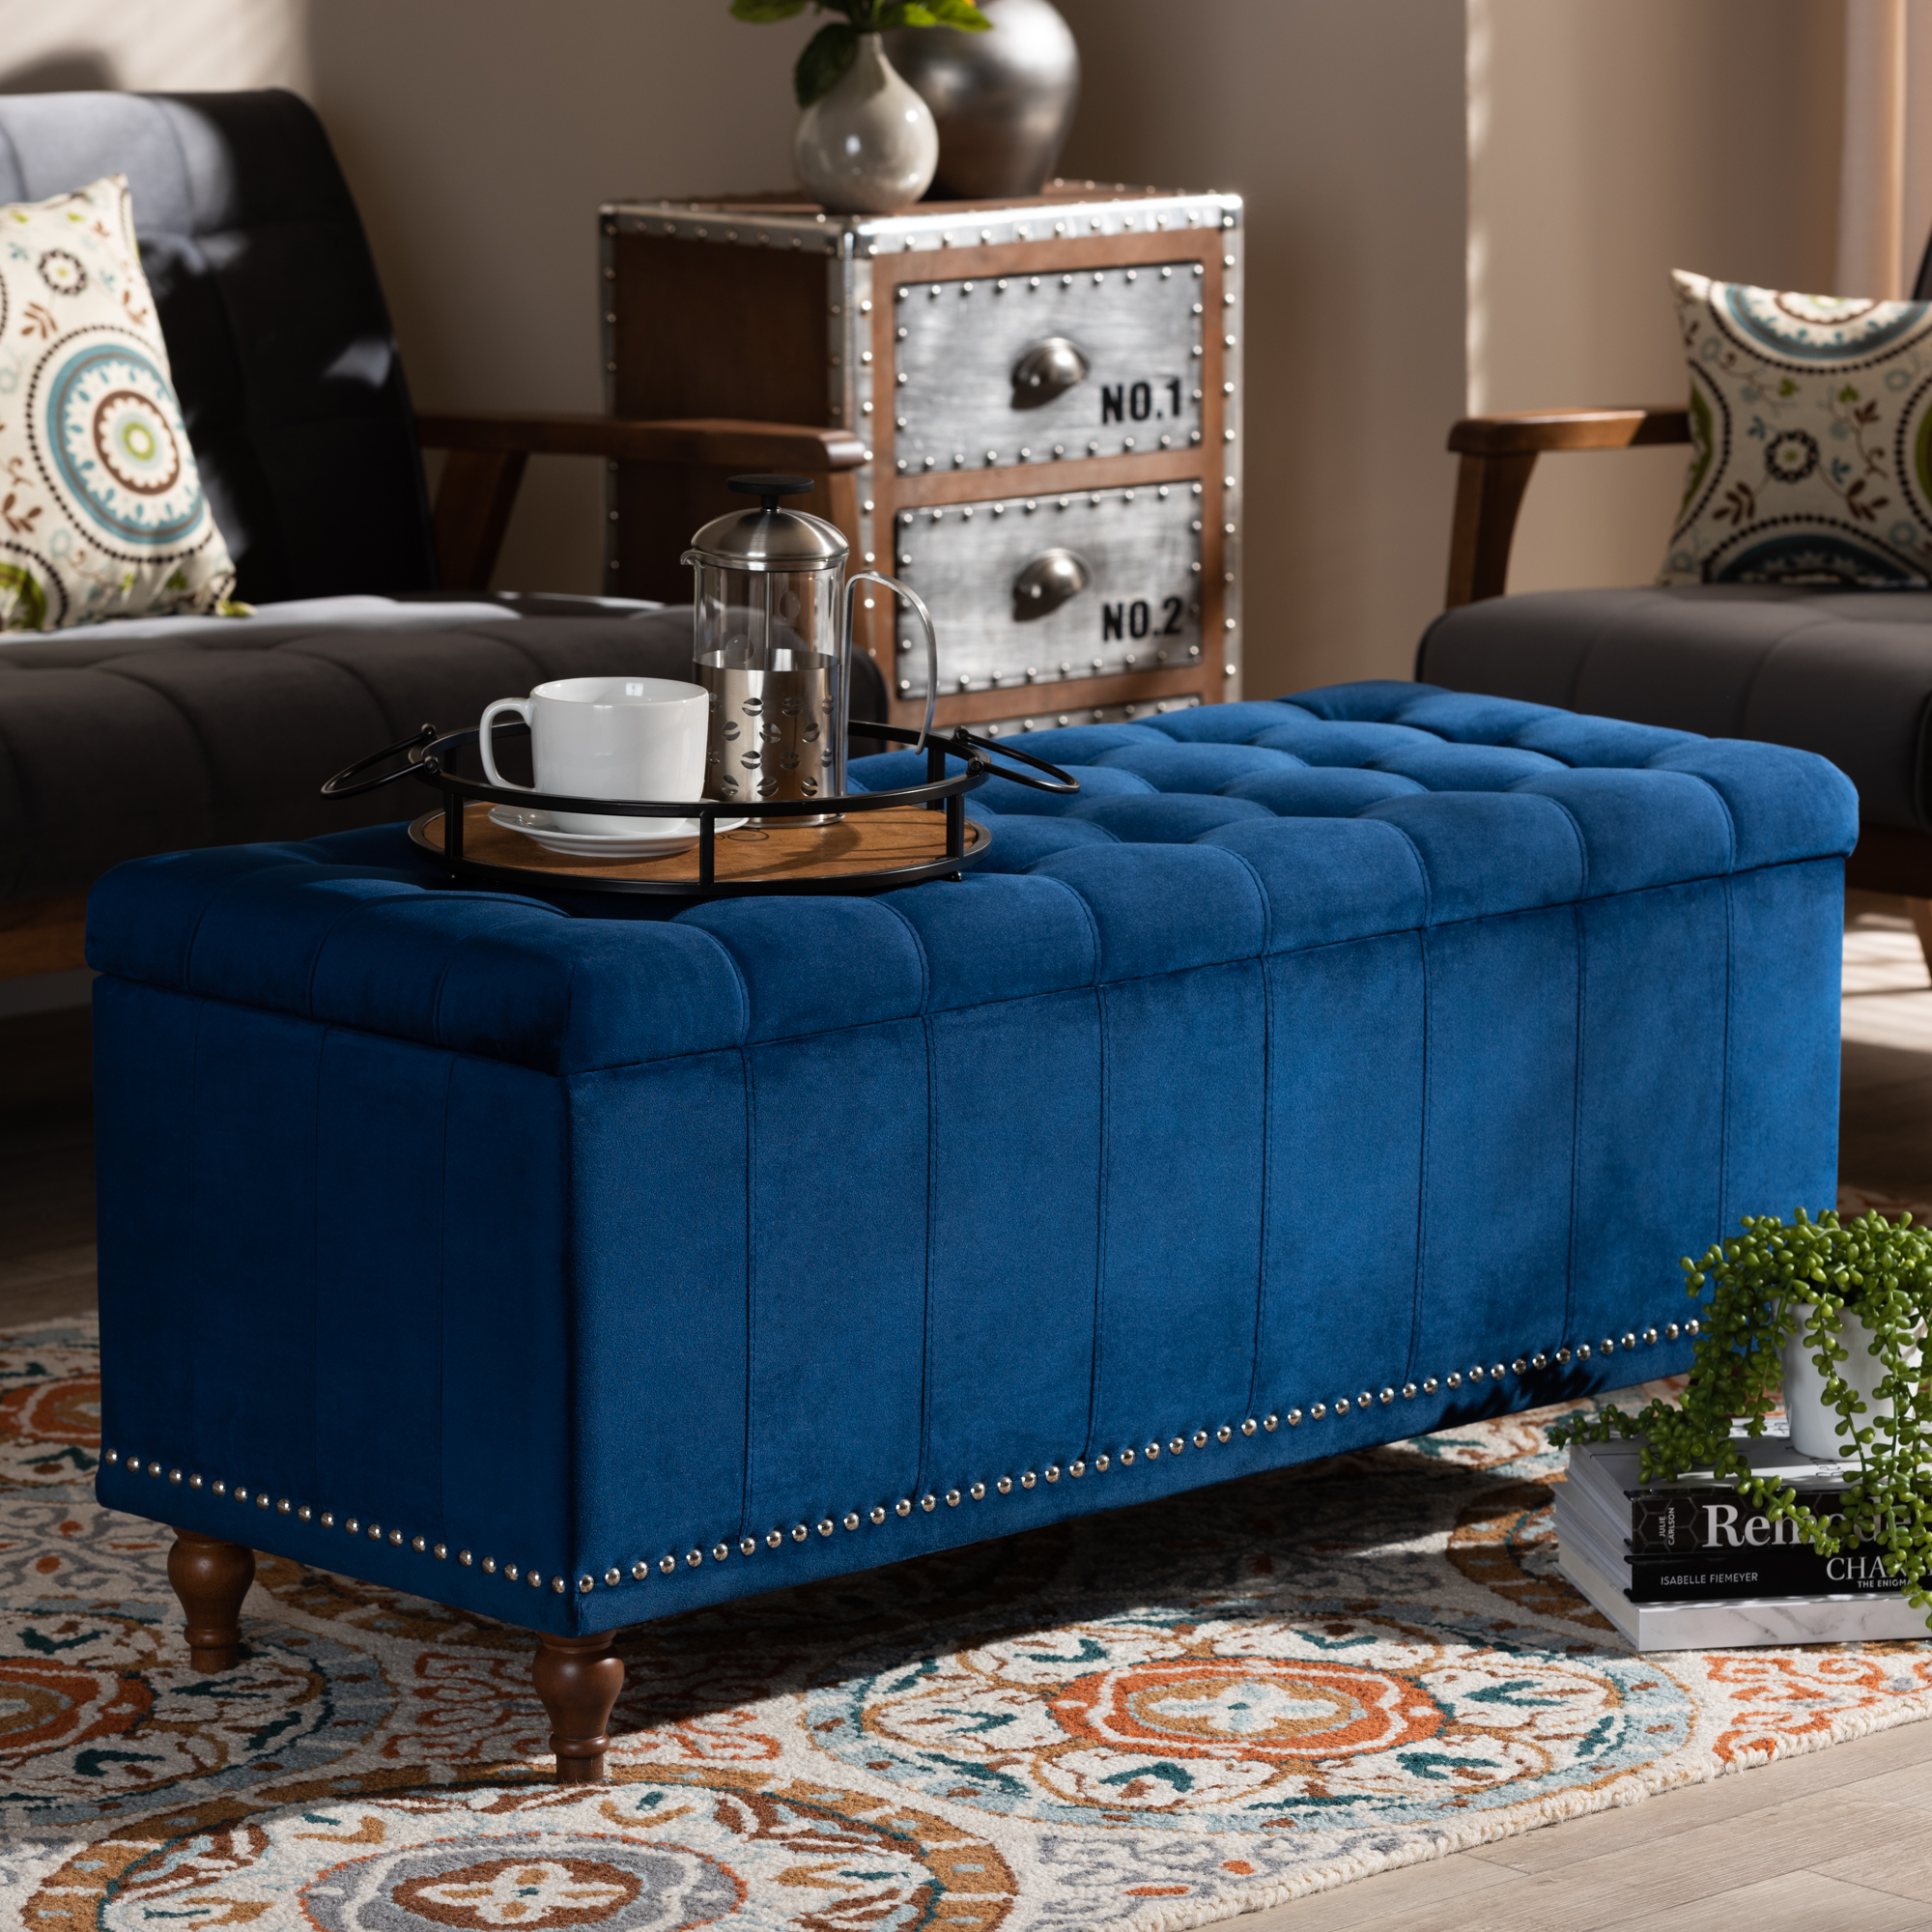 Baxton Studio Kaylee Modern and Contemporary Navy Blue Velvet Fabric Upholstered Button-Tufted Storage Ottoman Bench - image 1 of 11